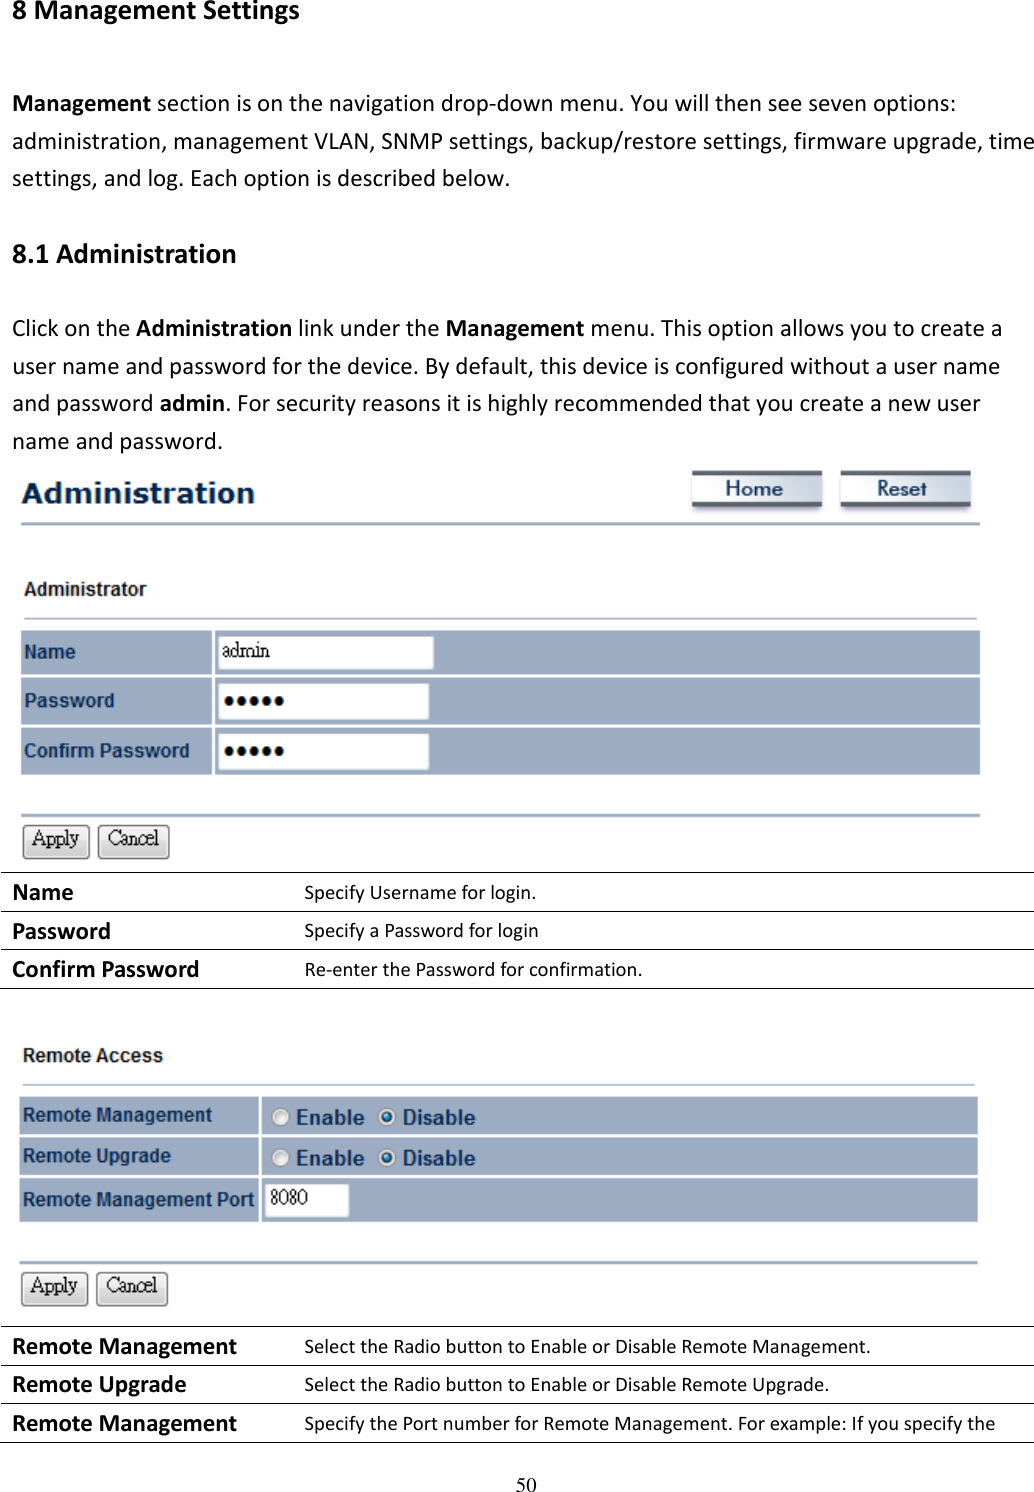   508 Management Settings Management section is on the navigation drop-down menu. You will then see seven options: administration, management VLAN, SNMP settings, backup/restore settings, firmware upgrade, time settings, and log. Each option is described below. 8.1 Administration Click on the Administration link under the Management menu. This option allows you to create a user name and password for the device. By default, this device is configured without a user name and password admin. For security reasons it is highly recommended that you create a new user name and password.  Name Specify Username for login. Password Specify a Password for login Confirm Password Re-enter the Password for confirmation.   Remote Management Select the Radio button to Enable or Disable Remote Management. Remote Upgrade Select the Radio button to Enable or Disable Remote Upgrade. Remote Management Specify the Port number for Remote Management. For example: If you specify the 